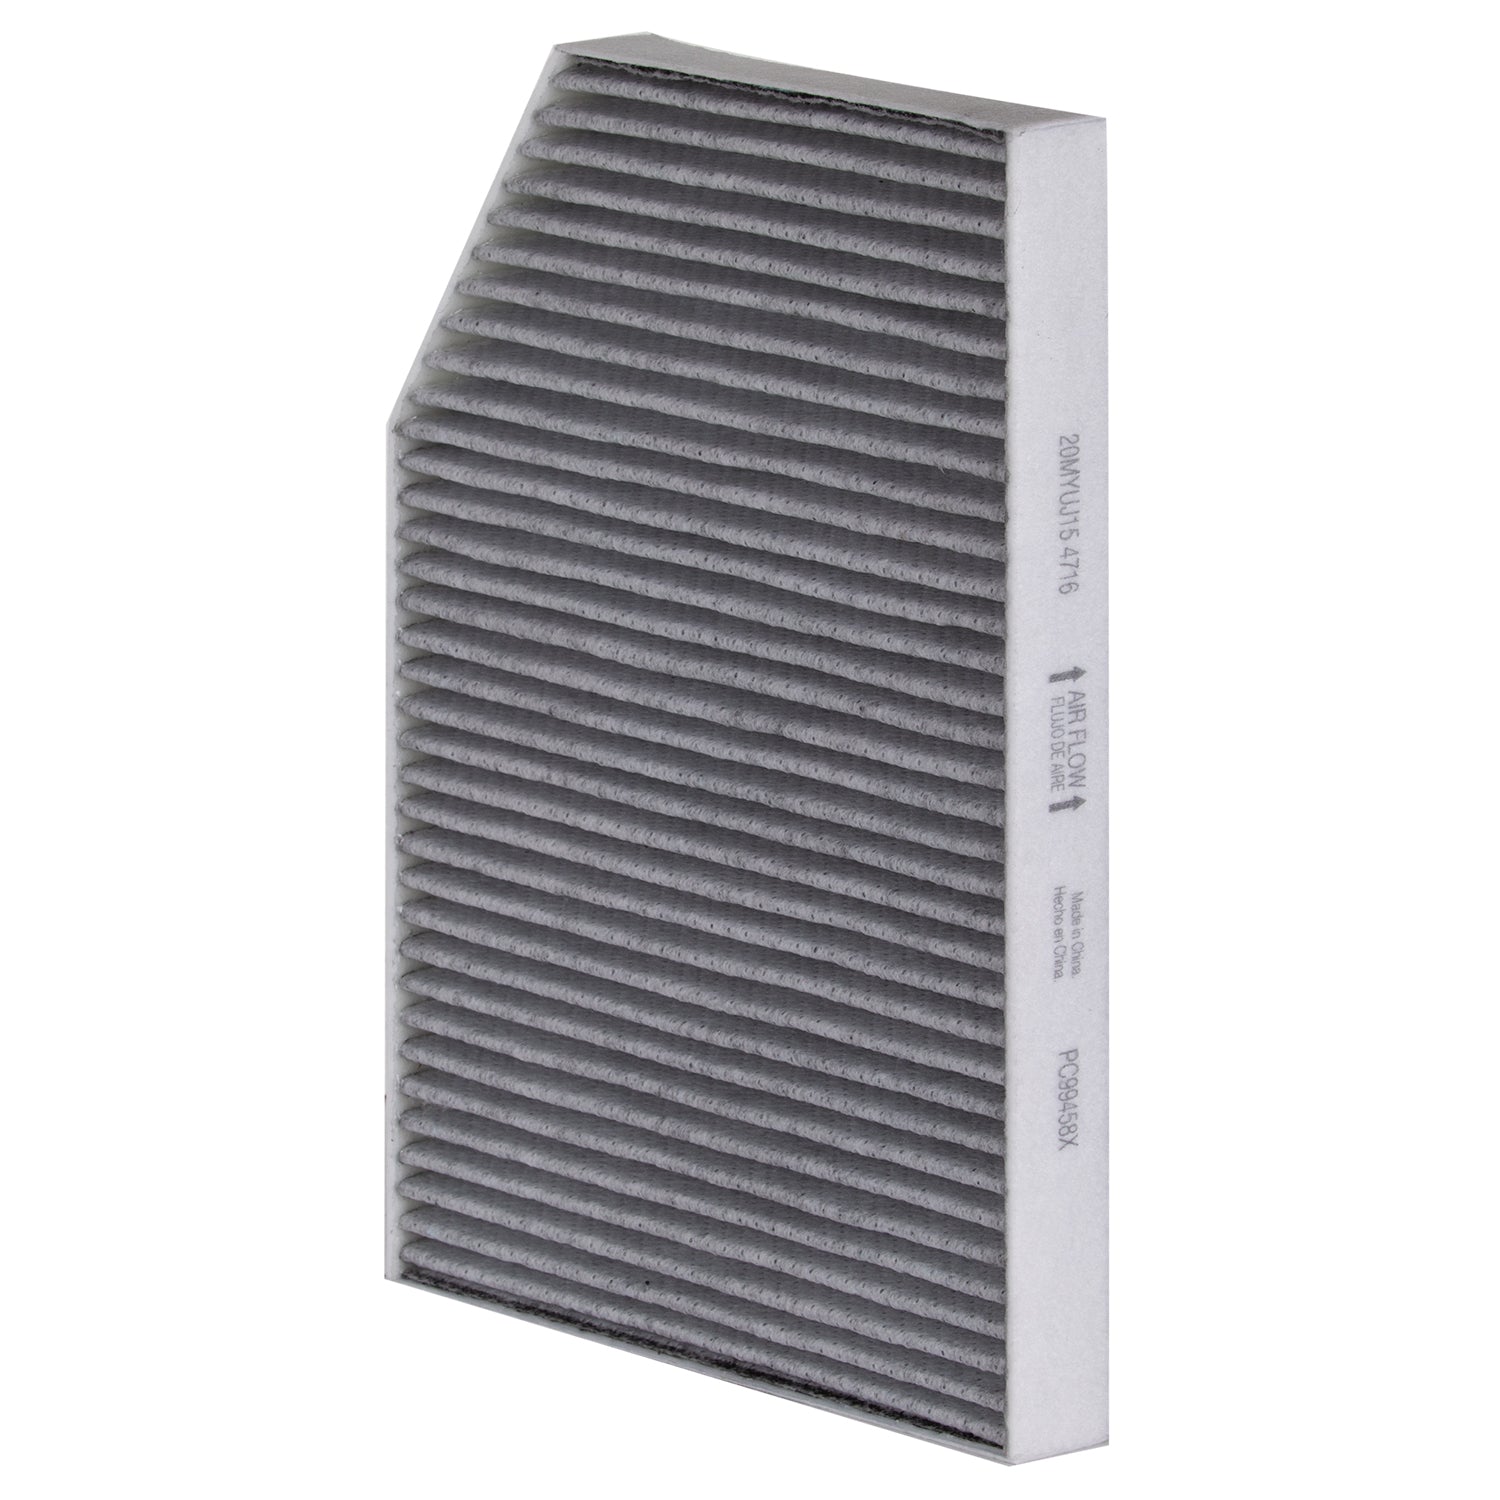 2019 BMW 330i Cabin Air Filter  PC99458X